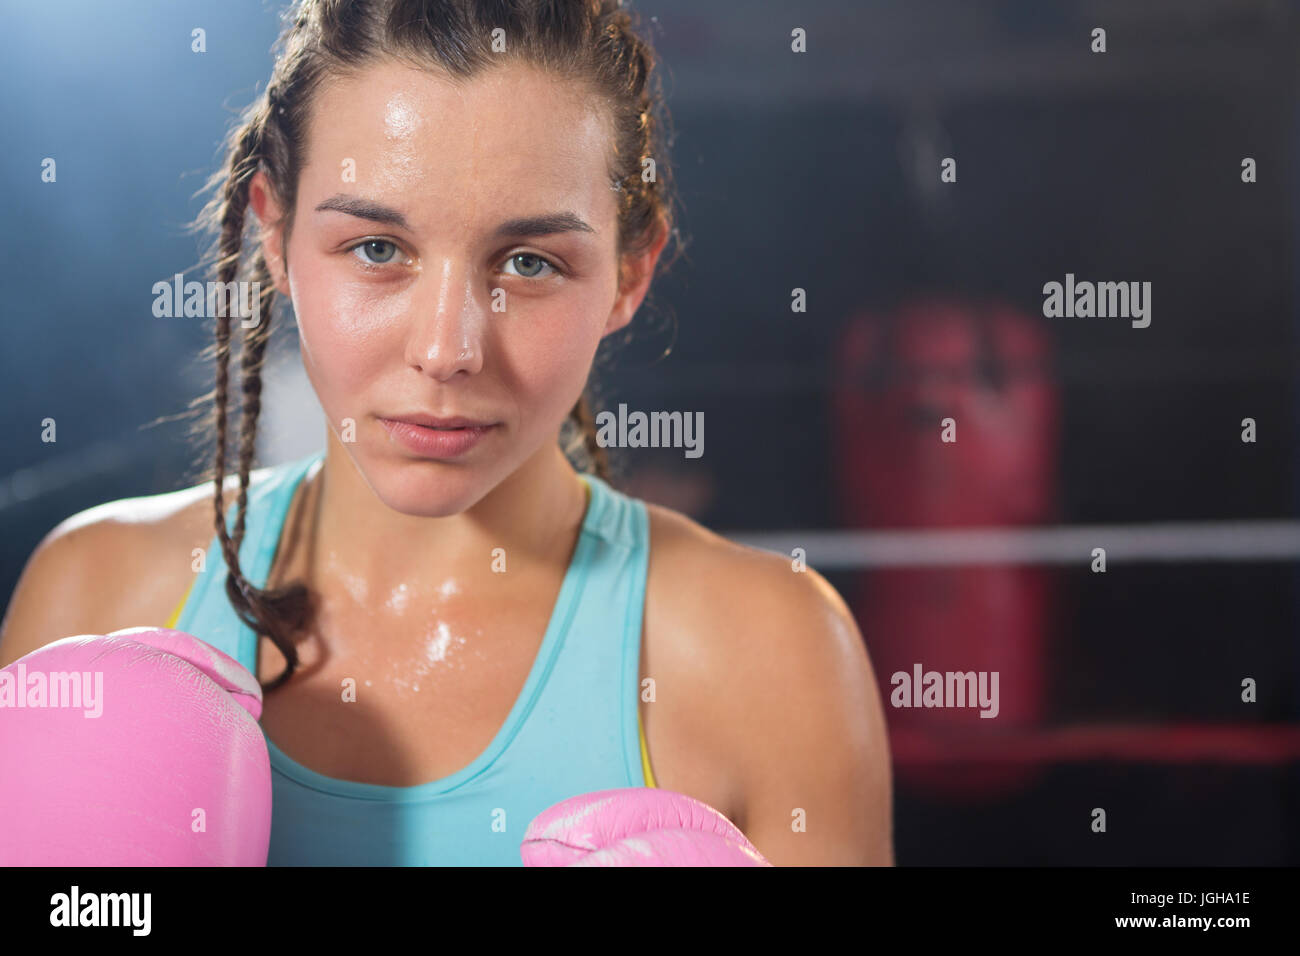 Close-up portrait of young female boxer in boxing ring Stock Photo